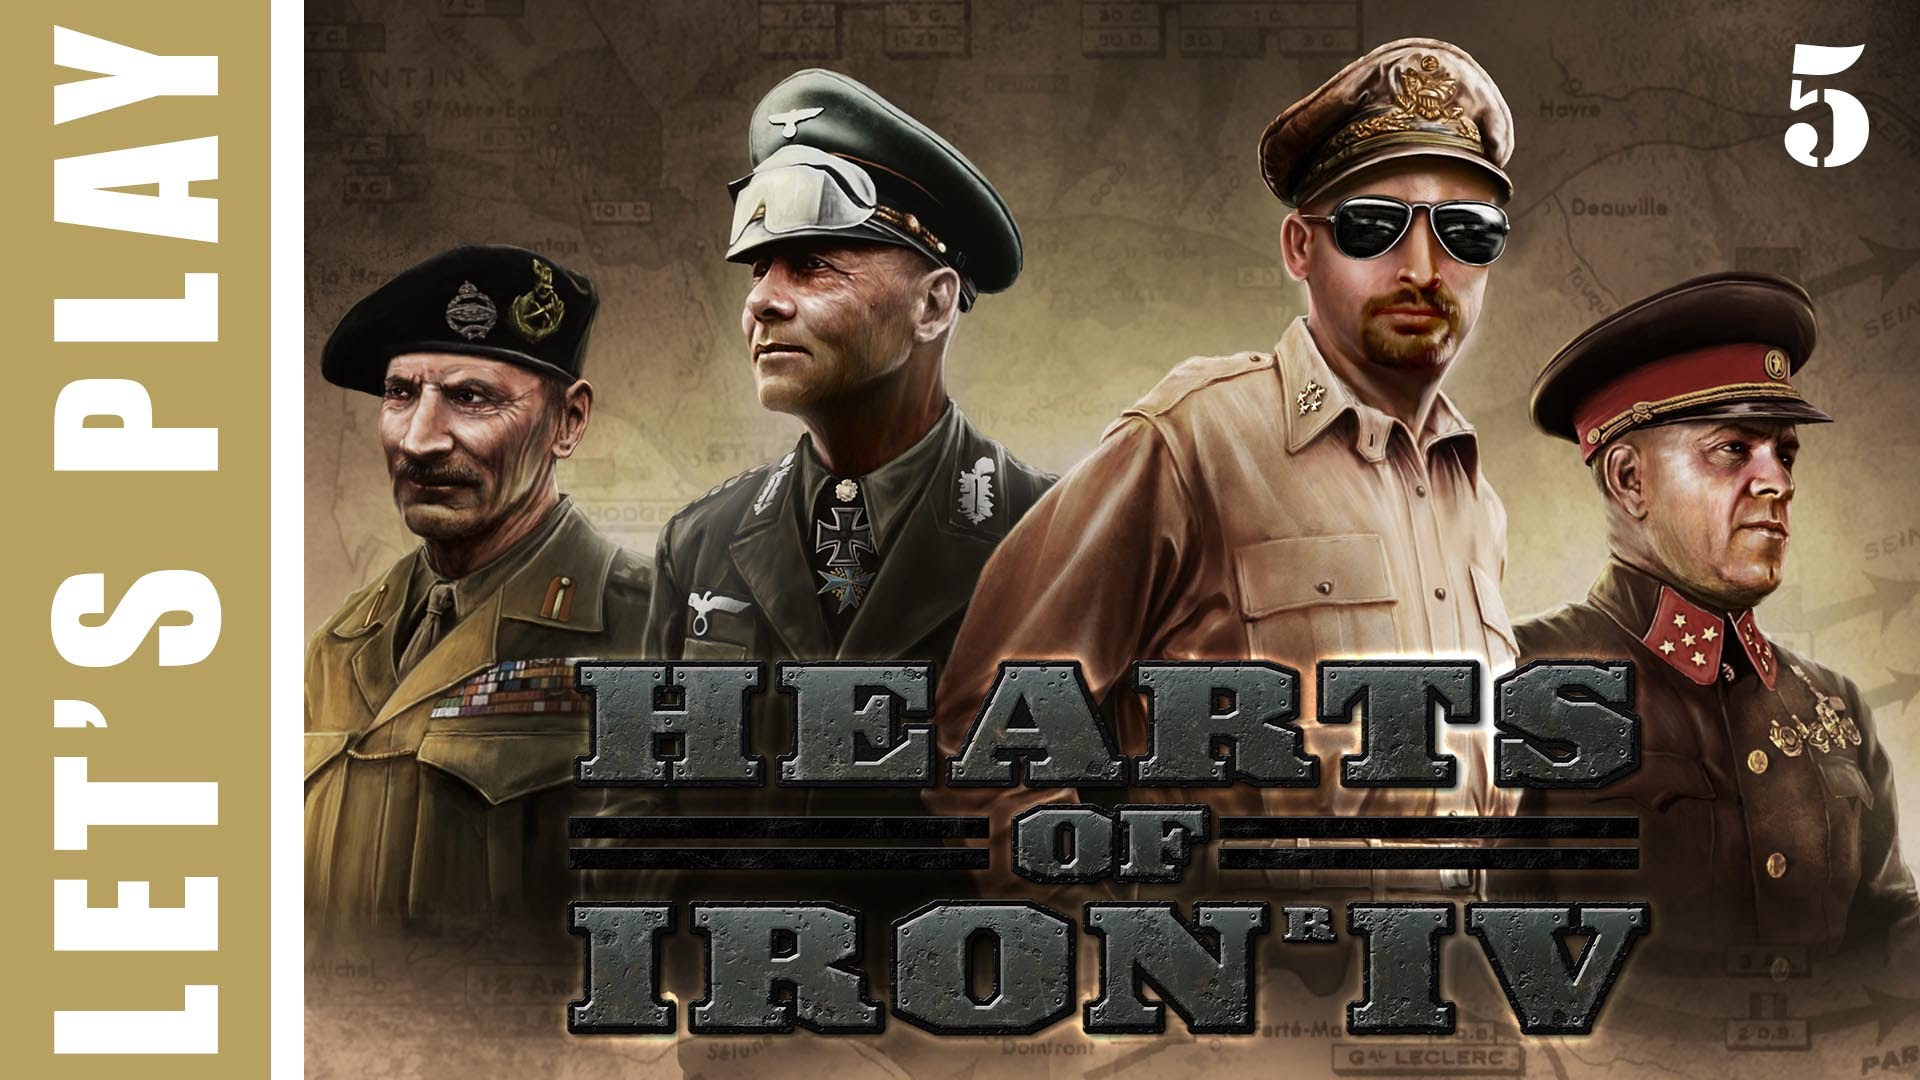 Hearts of Iron IV Germany Wins World War 2 Let’s Play 5